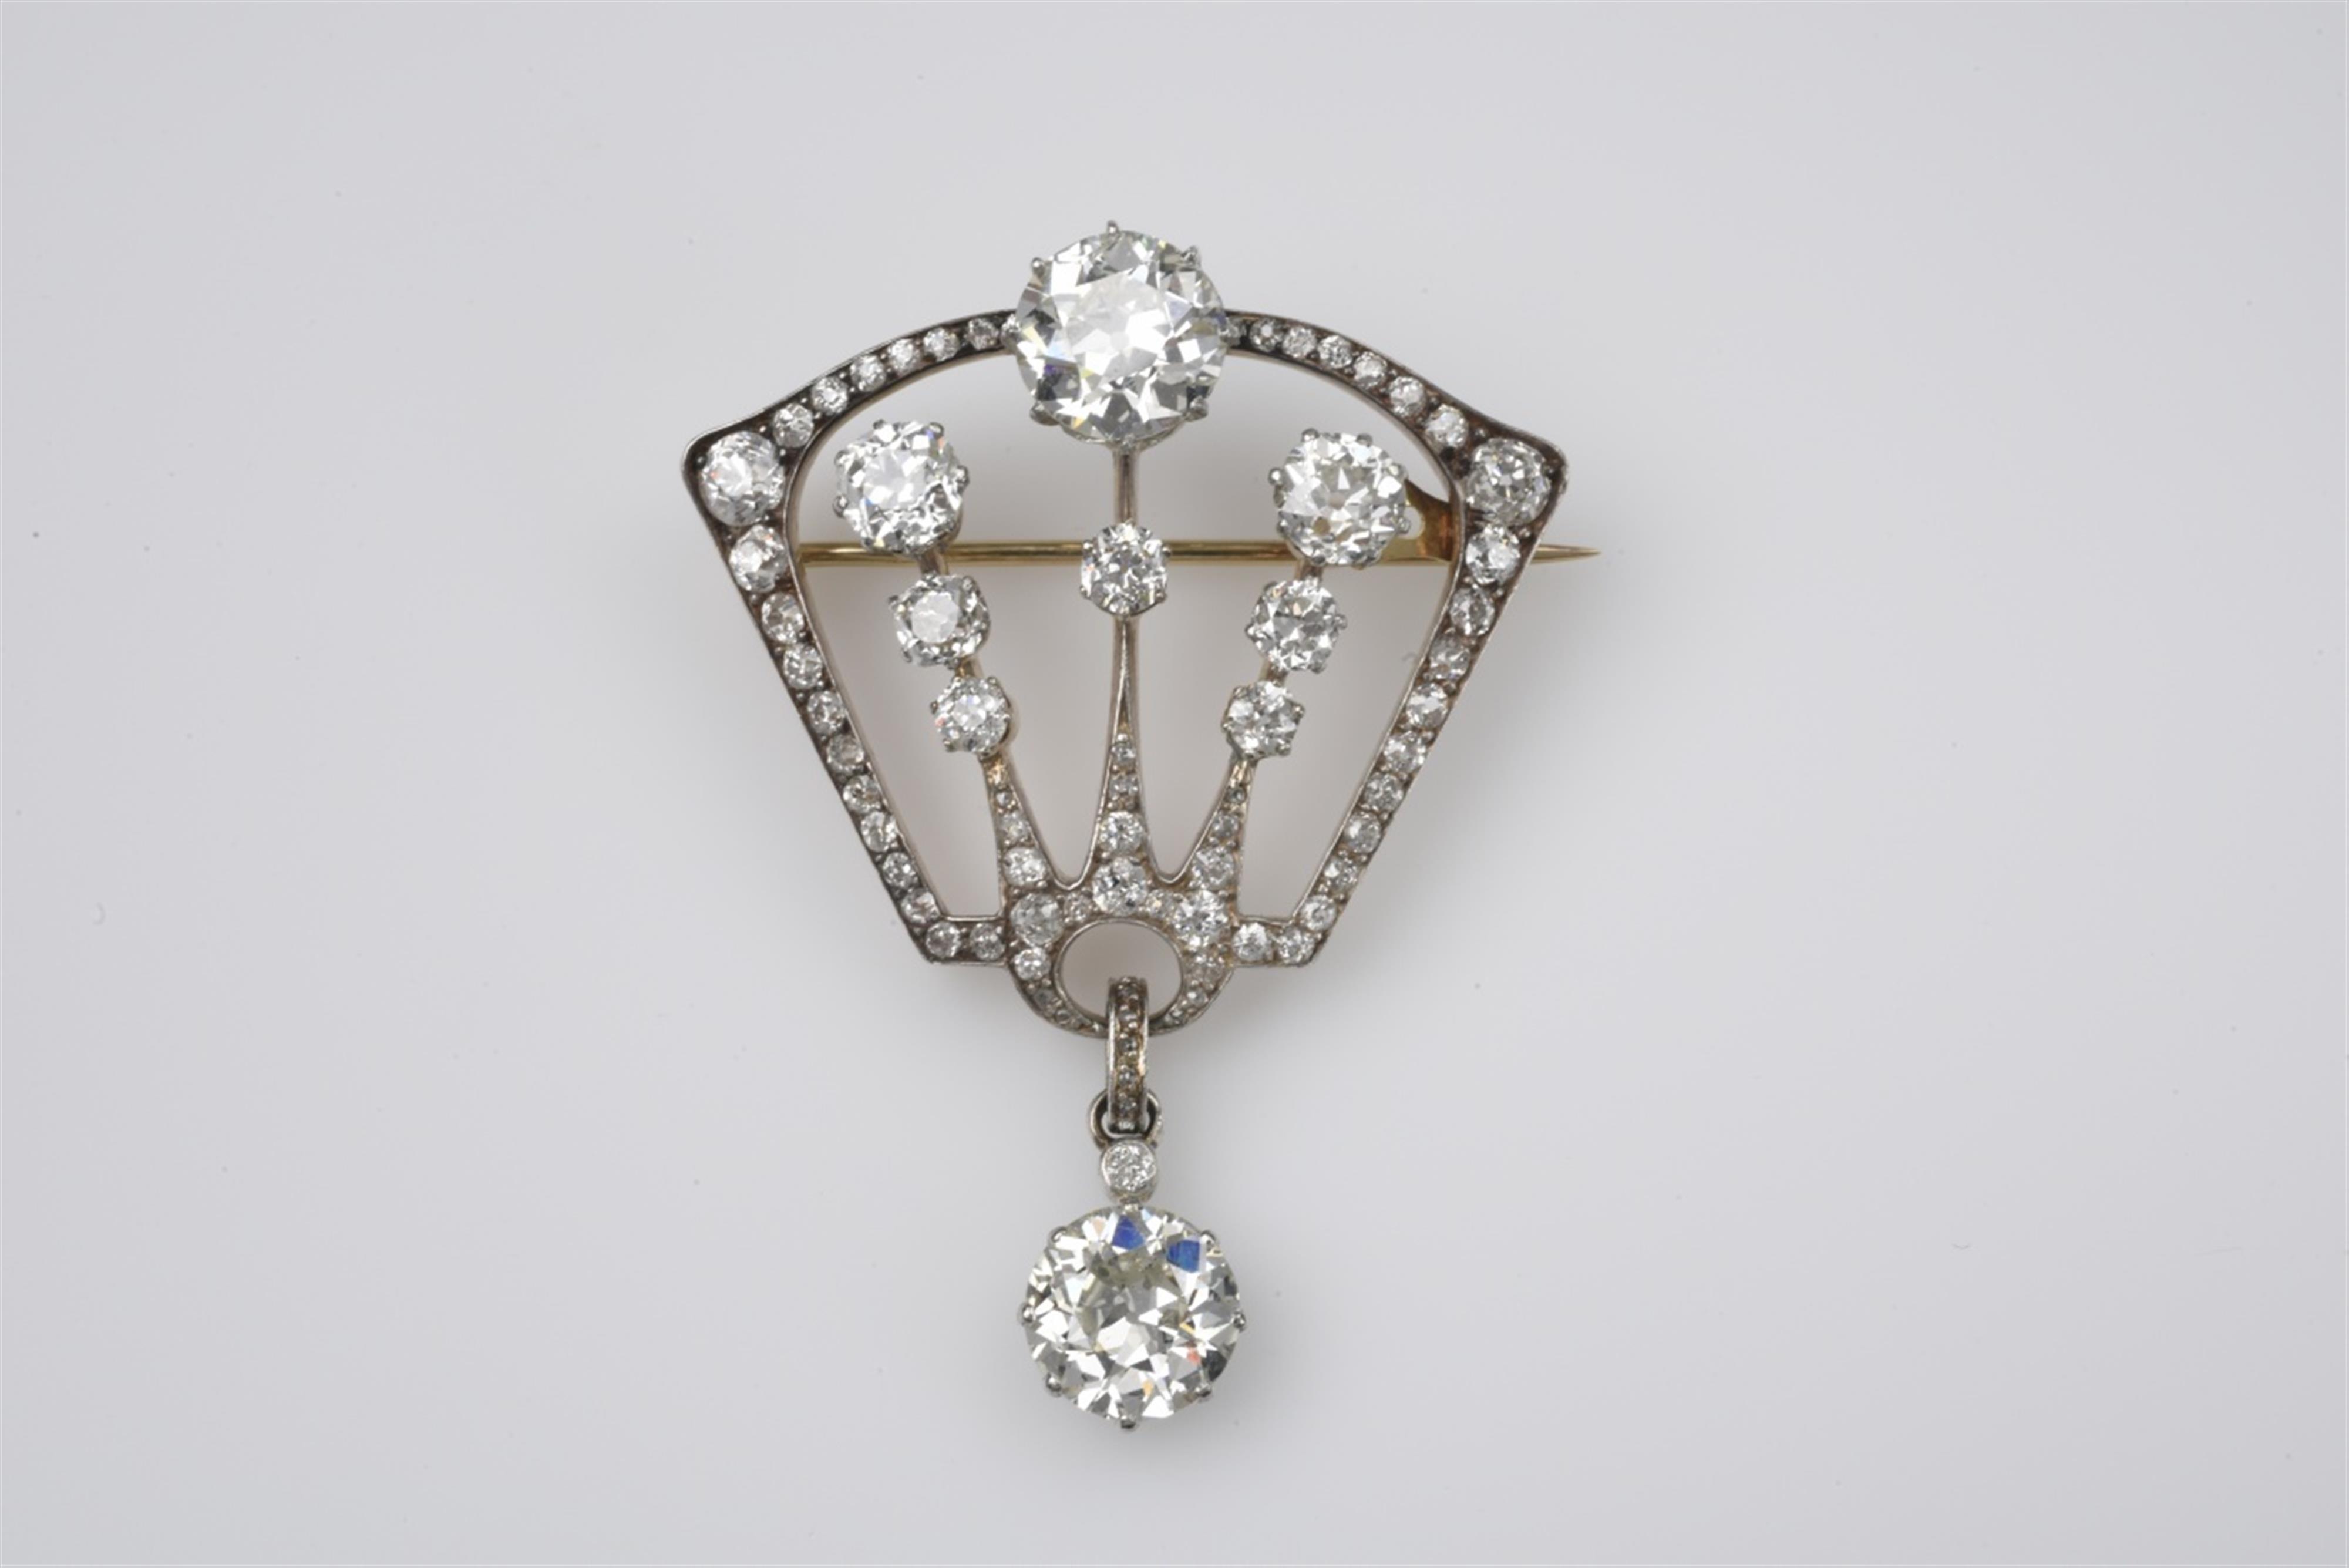 A 14k gold, silver, and diamond Belle Epoque brooch - image-1